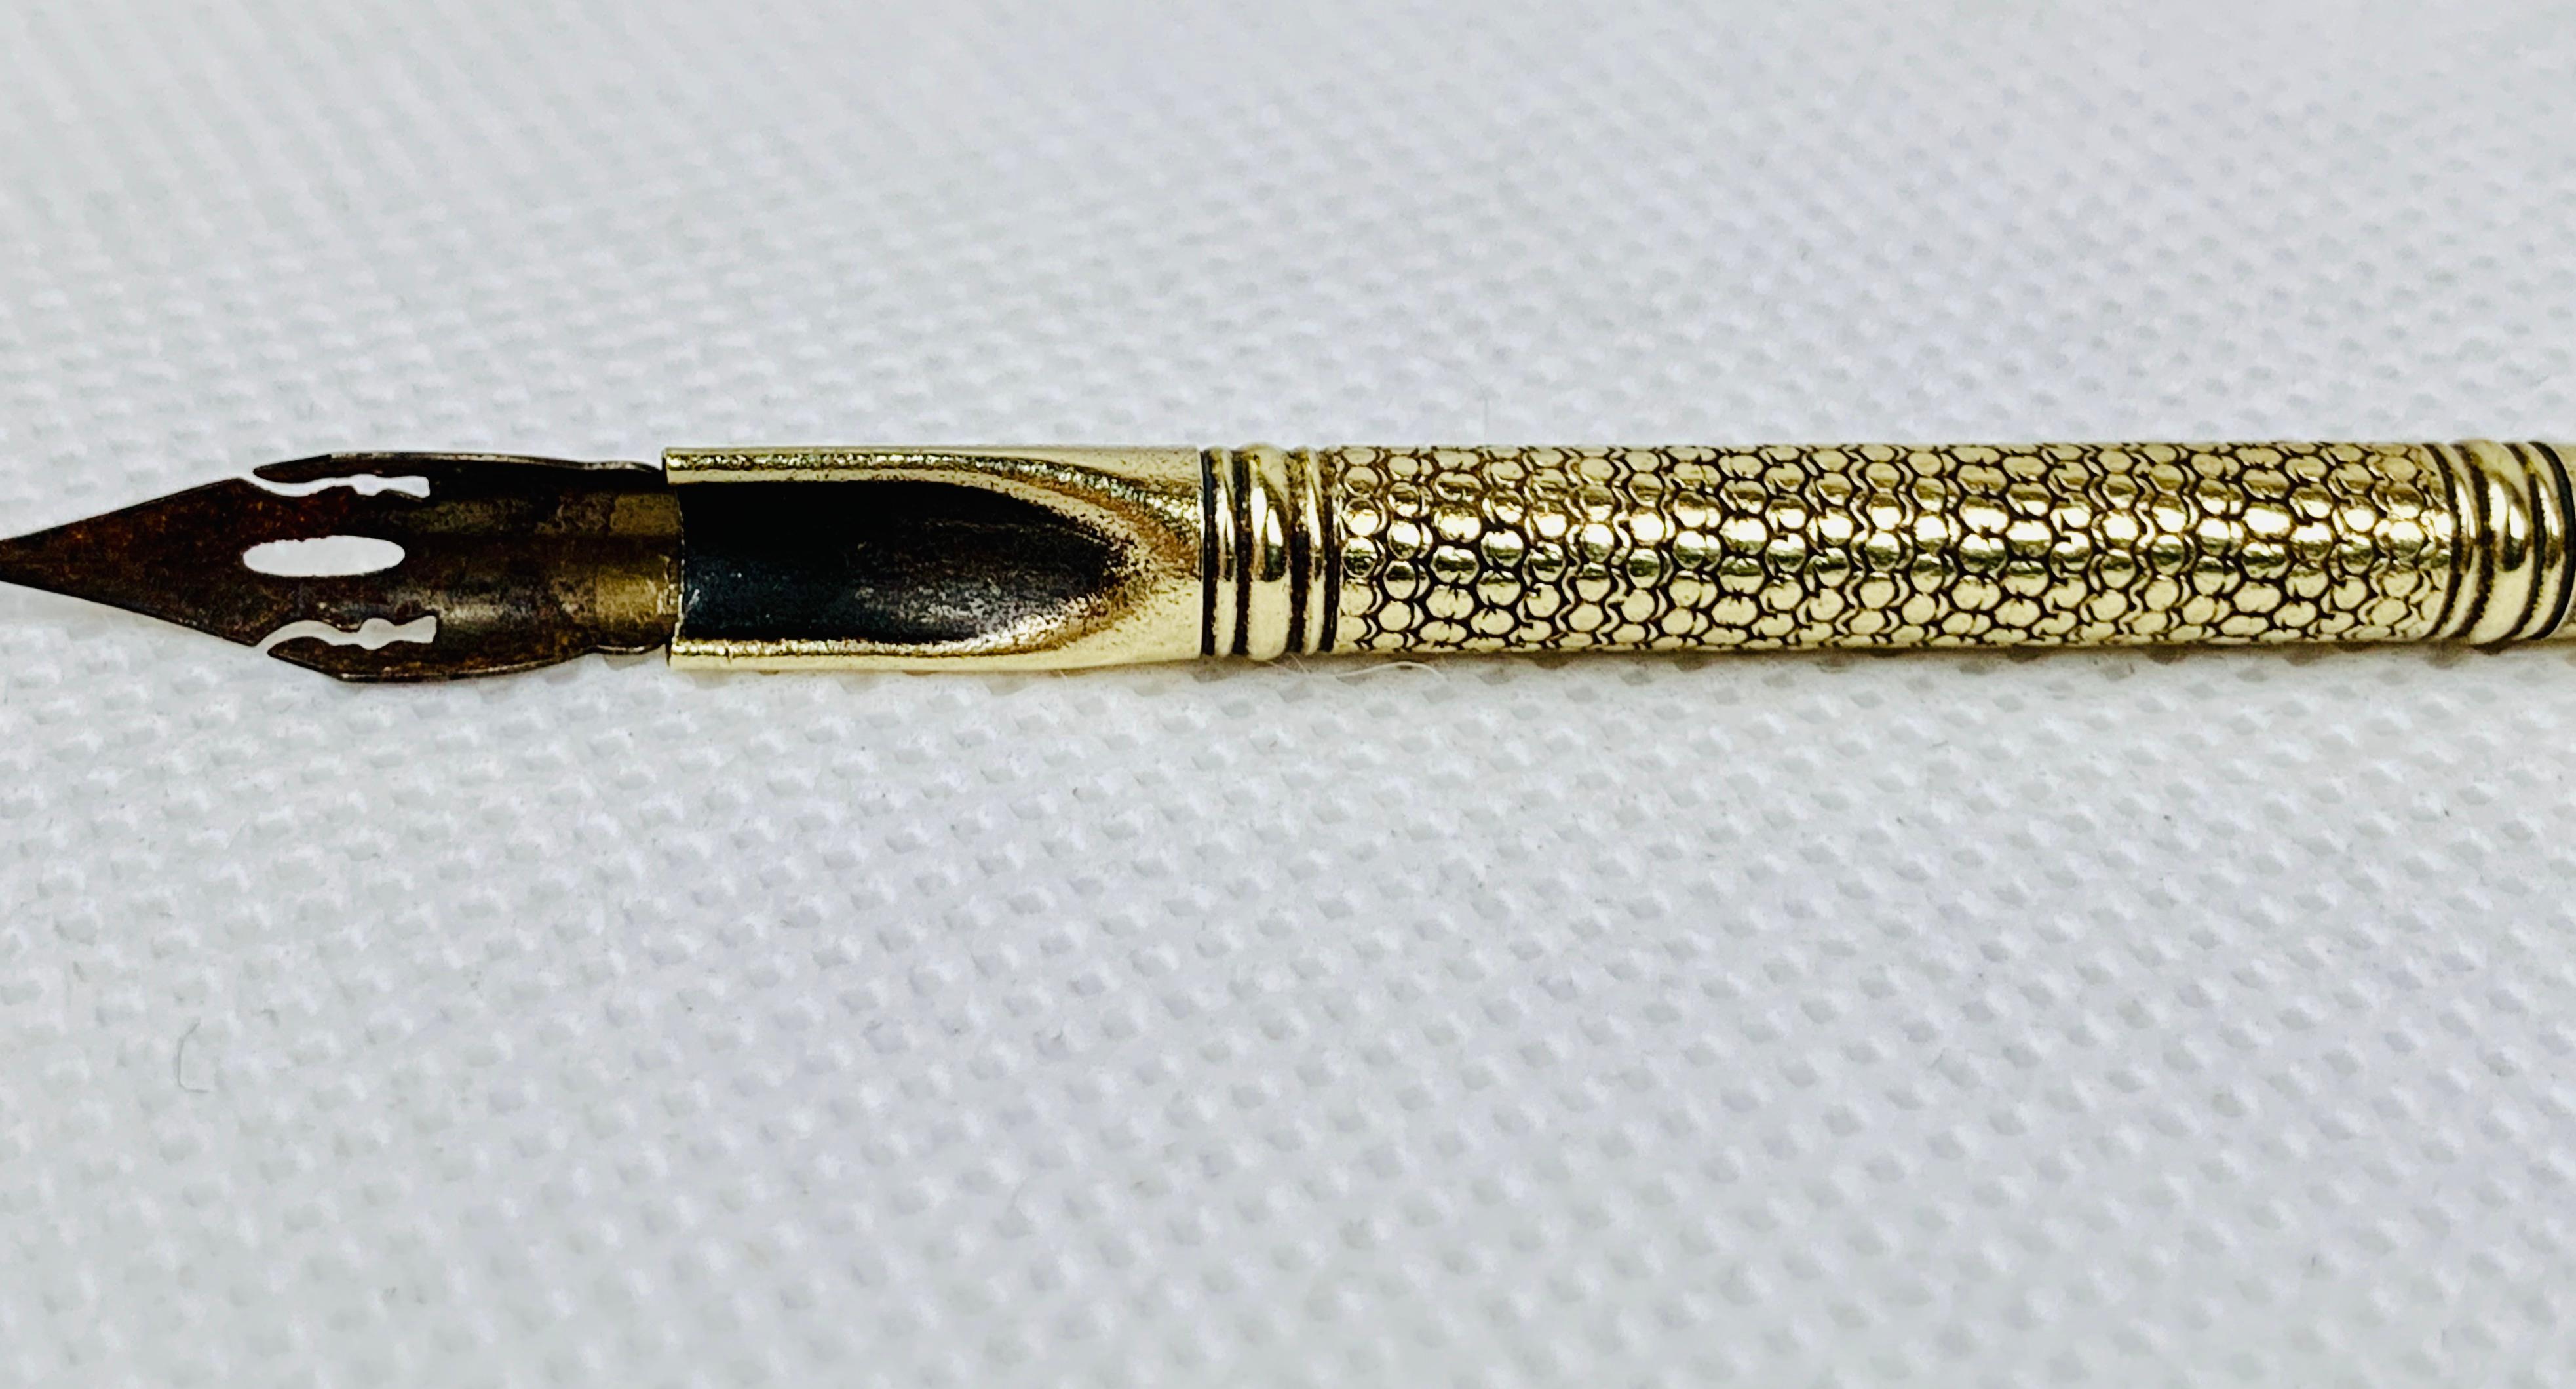 Hand-Carved Carved Mother of Pearl Pen with a Feather Motif in a Velvet Case